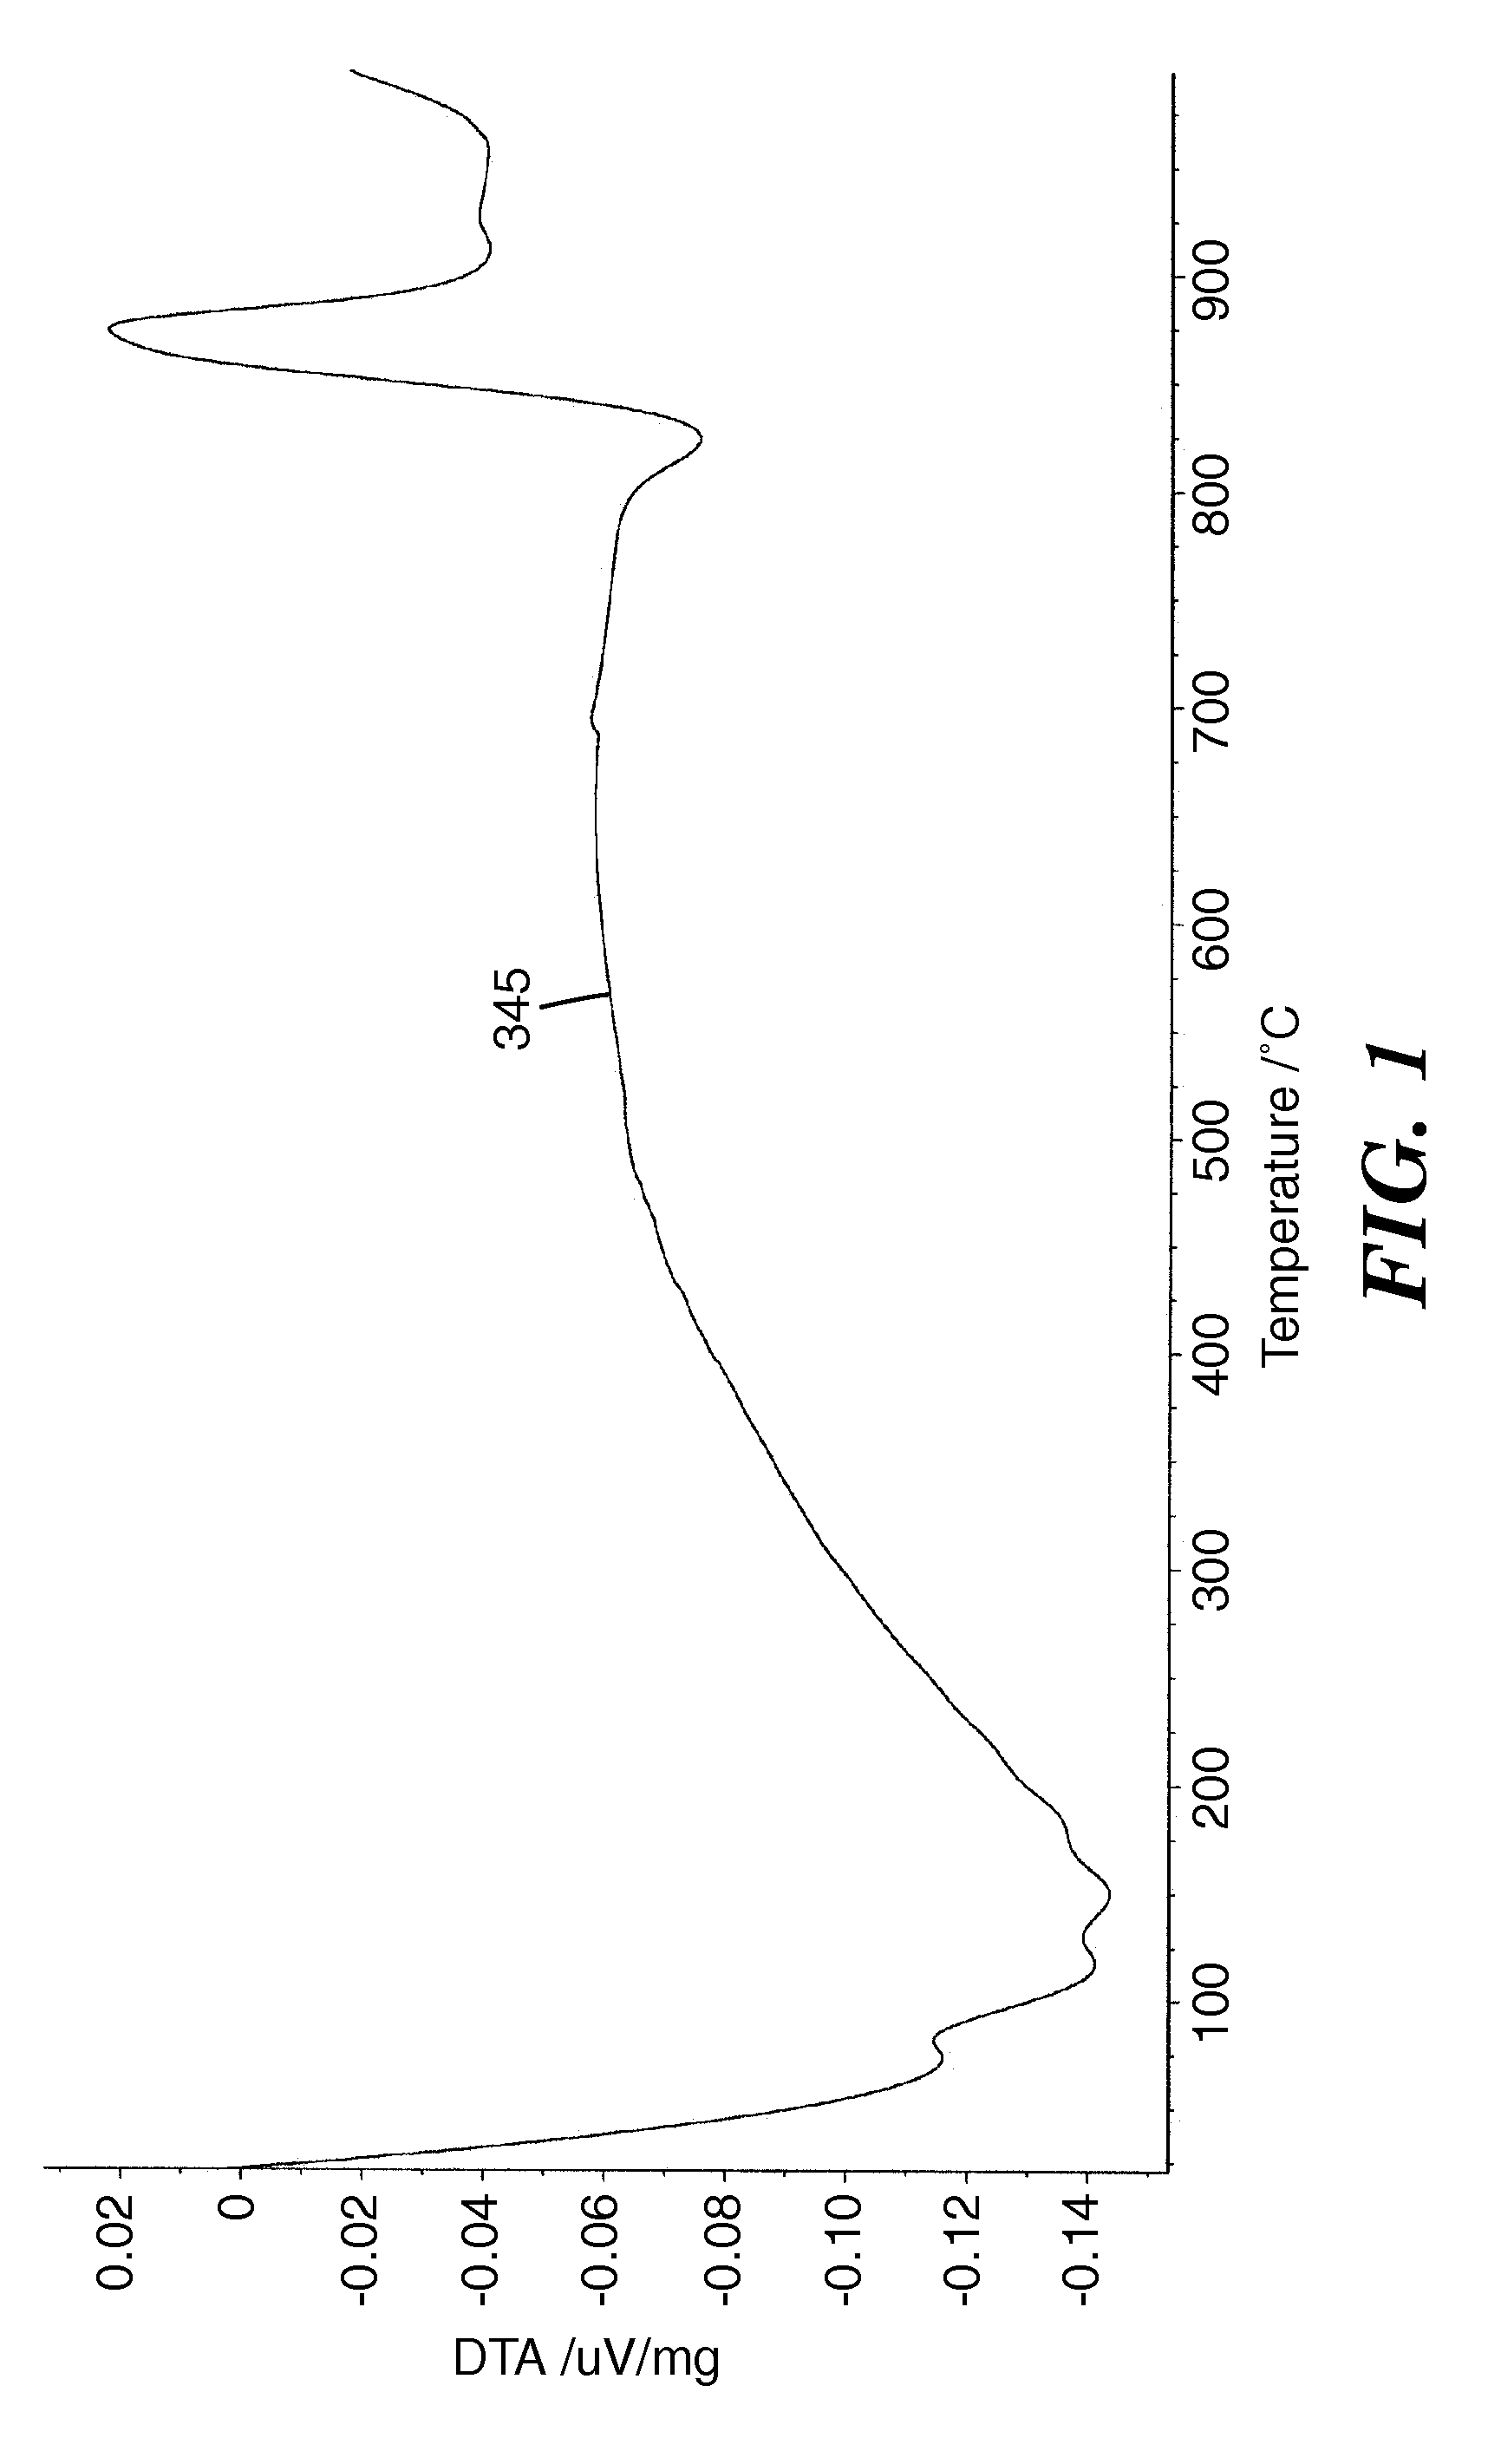 Method of making glass-ceramic and articles made therefrom